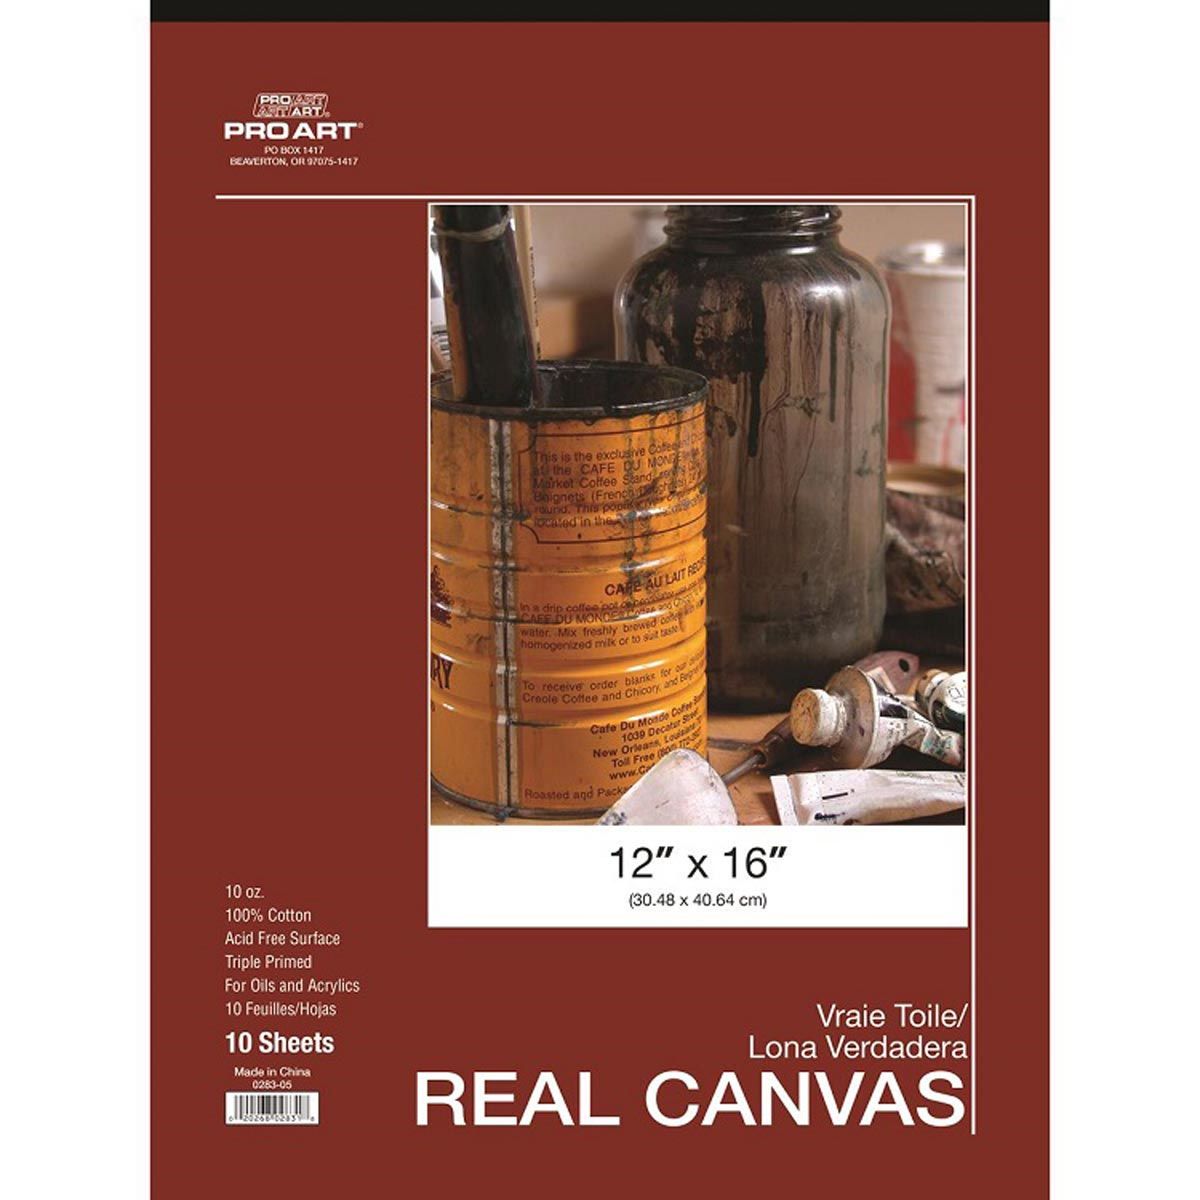 Pro Art Real Canvas Pad 10 Sheet 12 x 16-inches